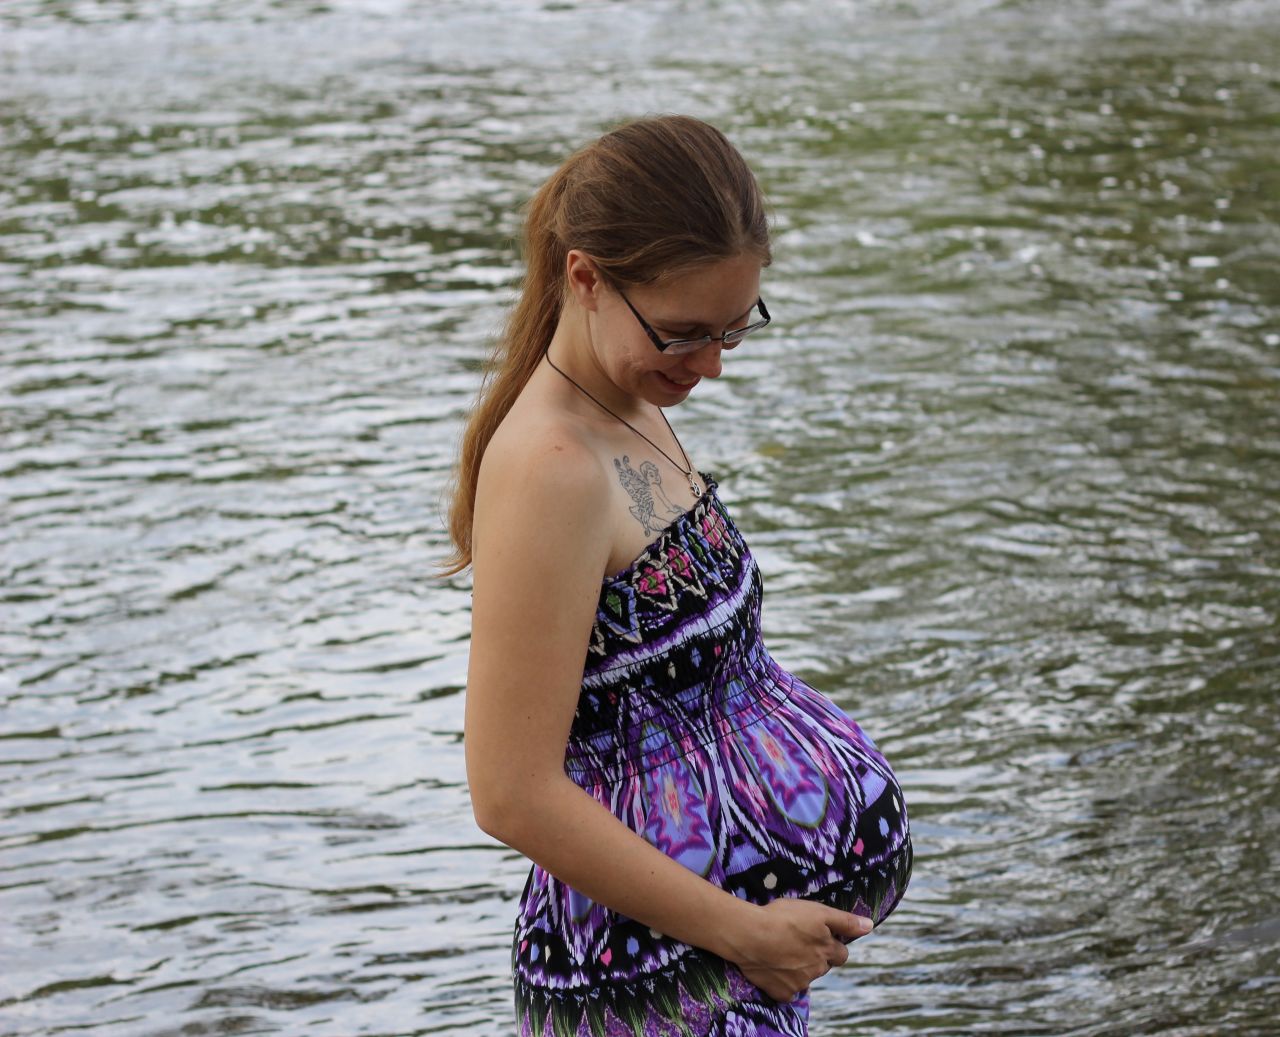 Kelley abruptly moved from Connecticut to Michigan before the final months of her pregnancy, where by law she would be the baby's mother when the child was born. 